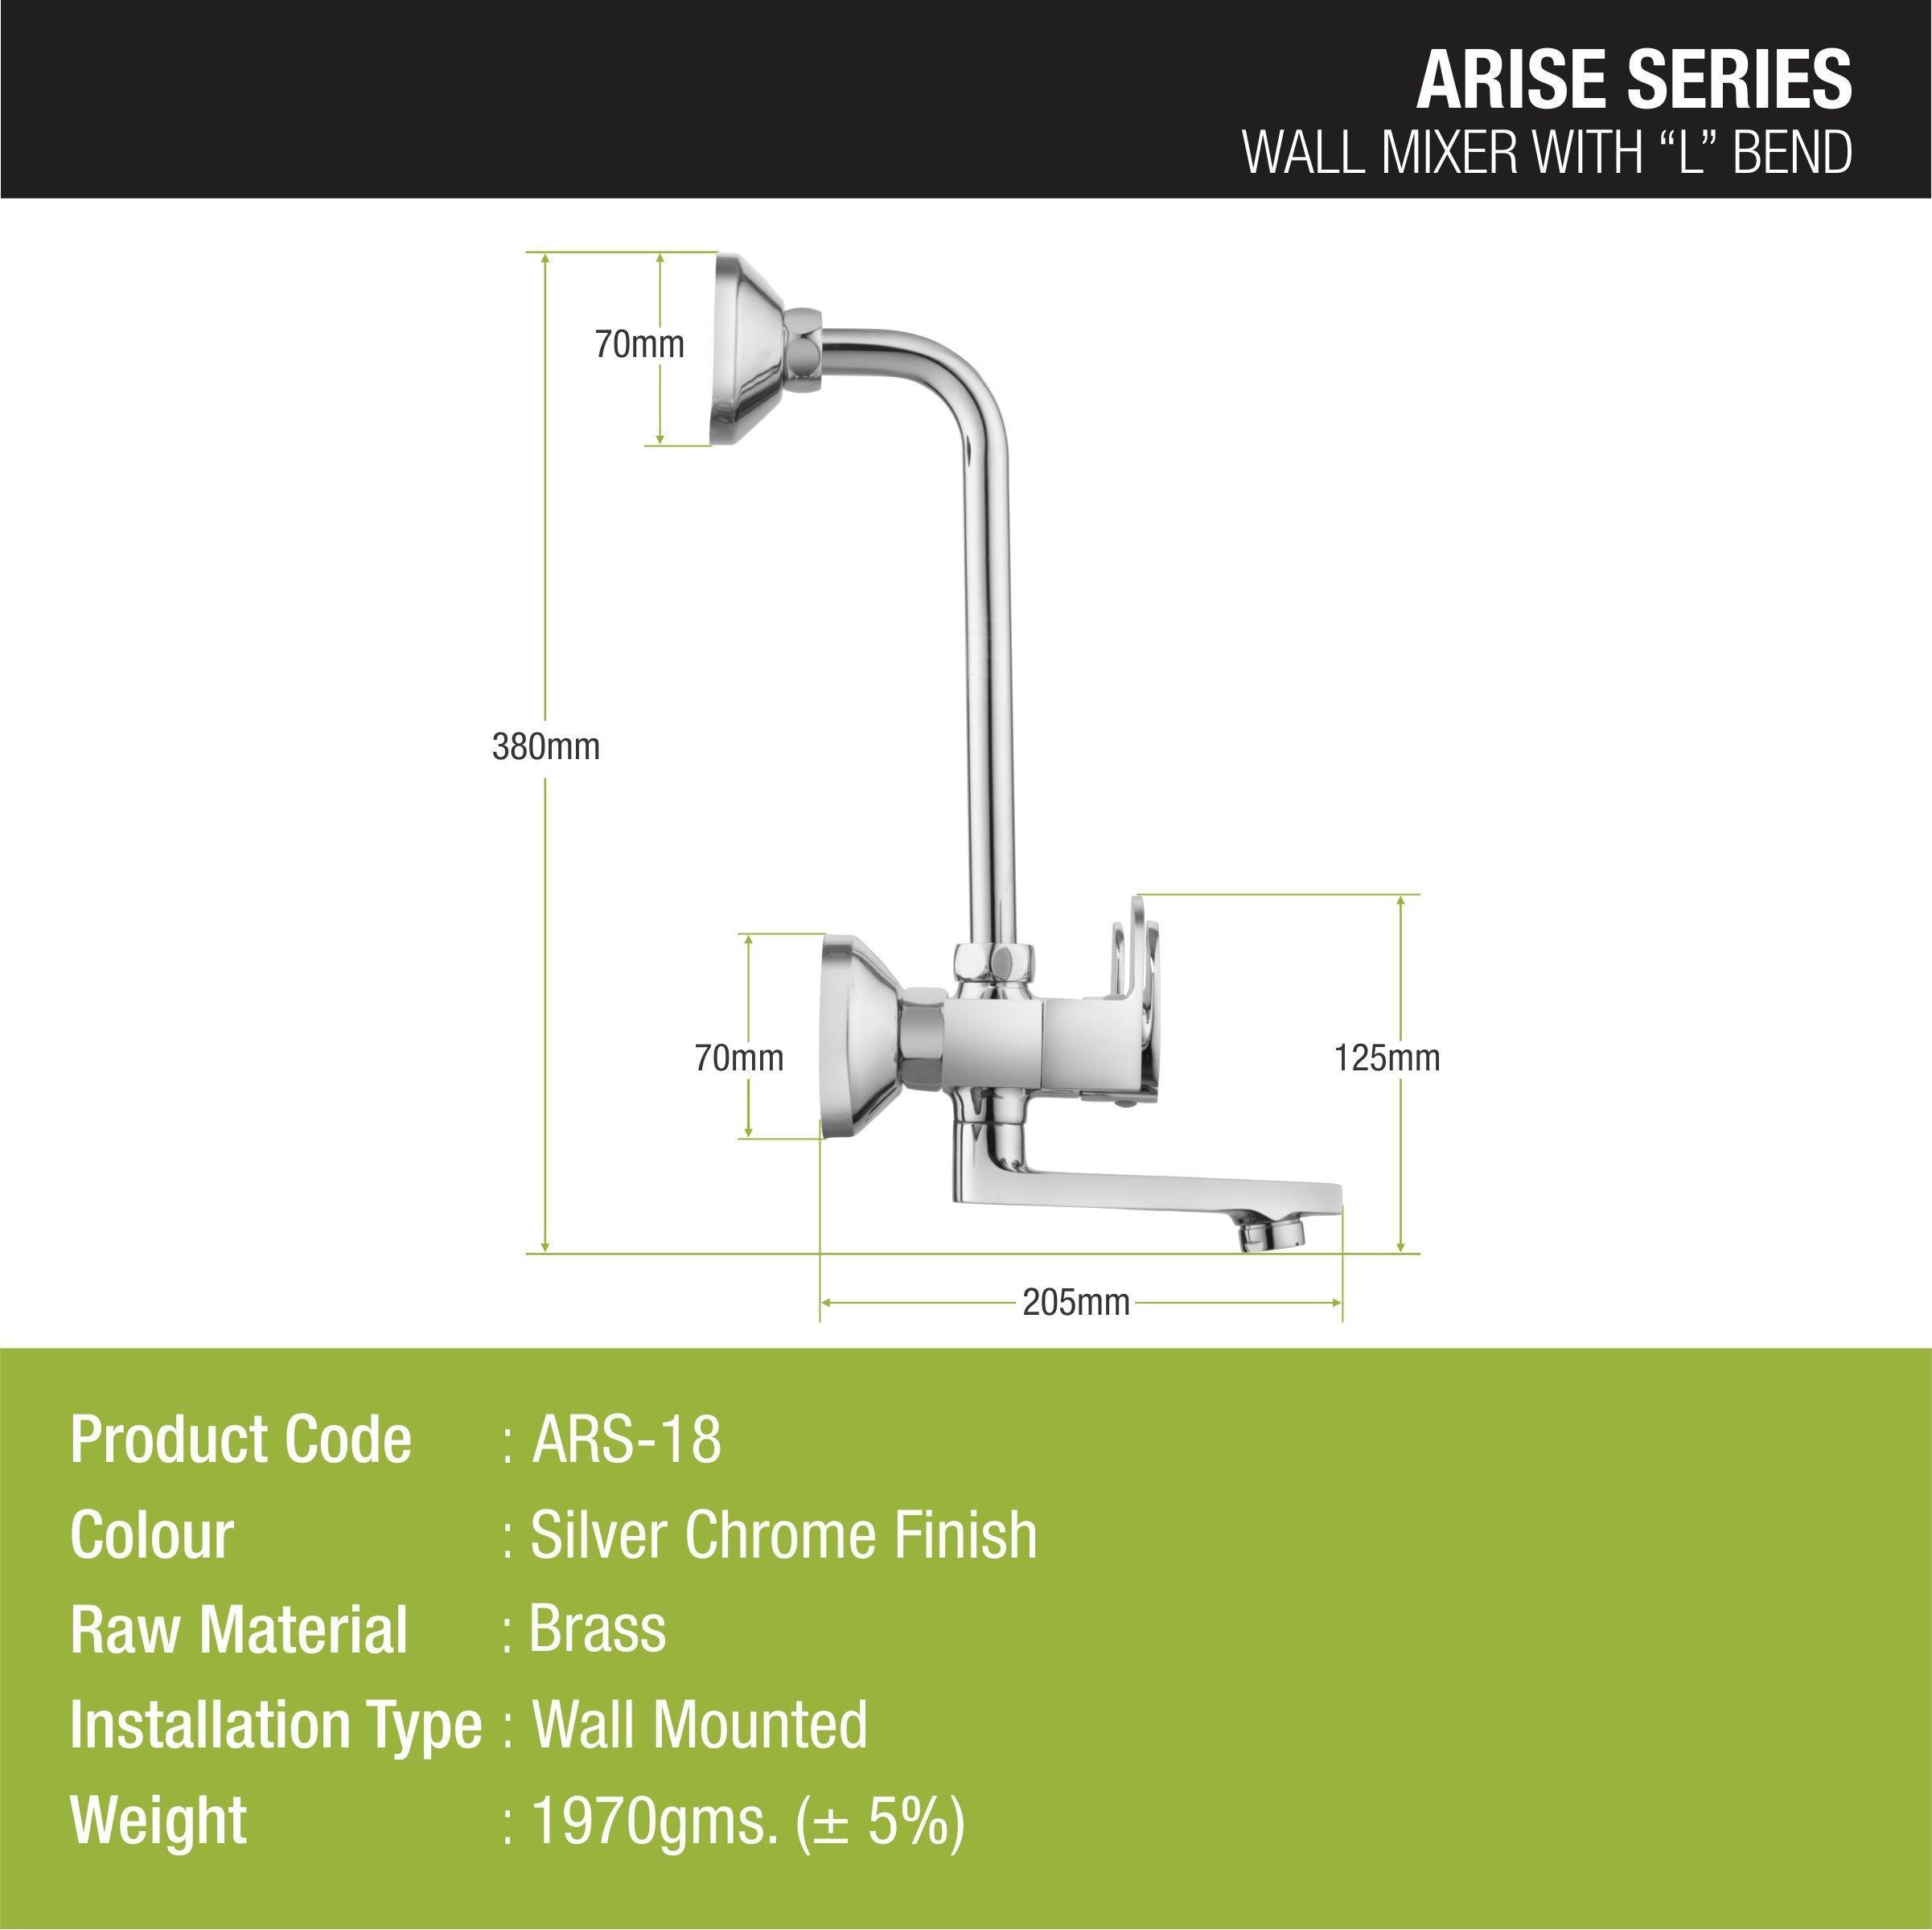 Arise Wall Mixer with L Bend Faucet sizes and dimensions 